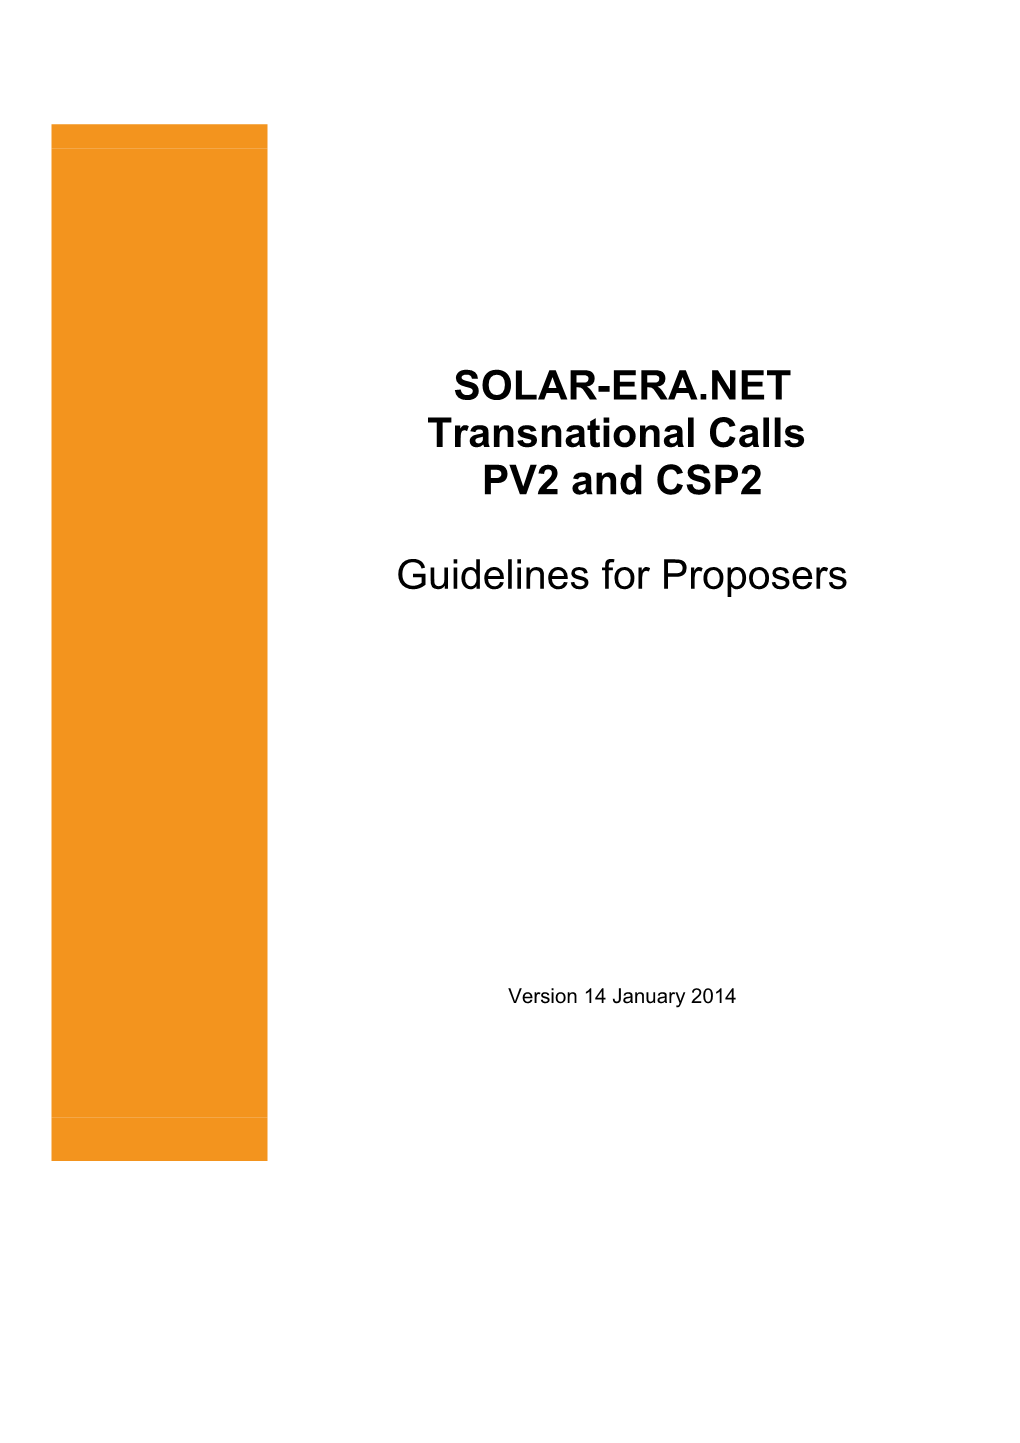 2. Scope and Structure of the SOLAR-ERA.NET Transnational Calls PV2 and CSP2